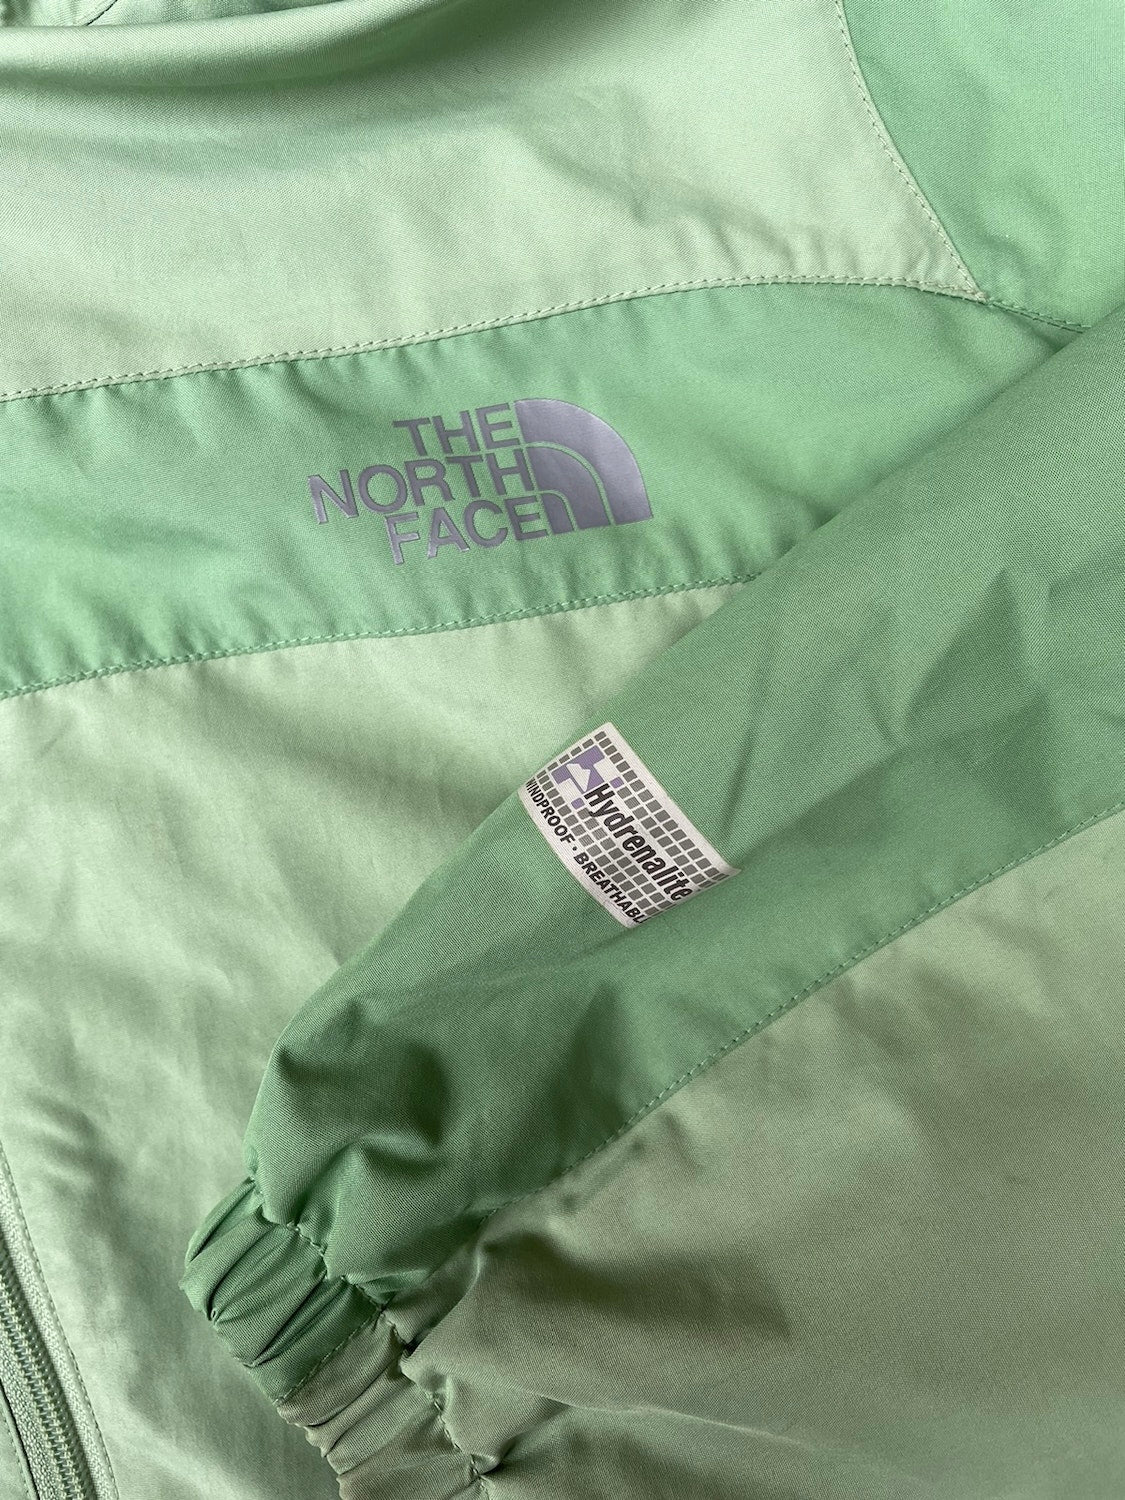 2000’s The North Face Hydrenalite Shell Jacket - L